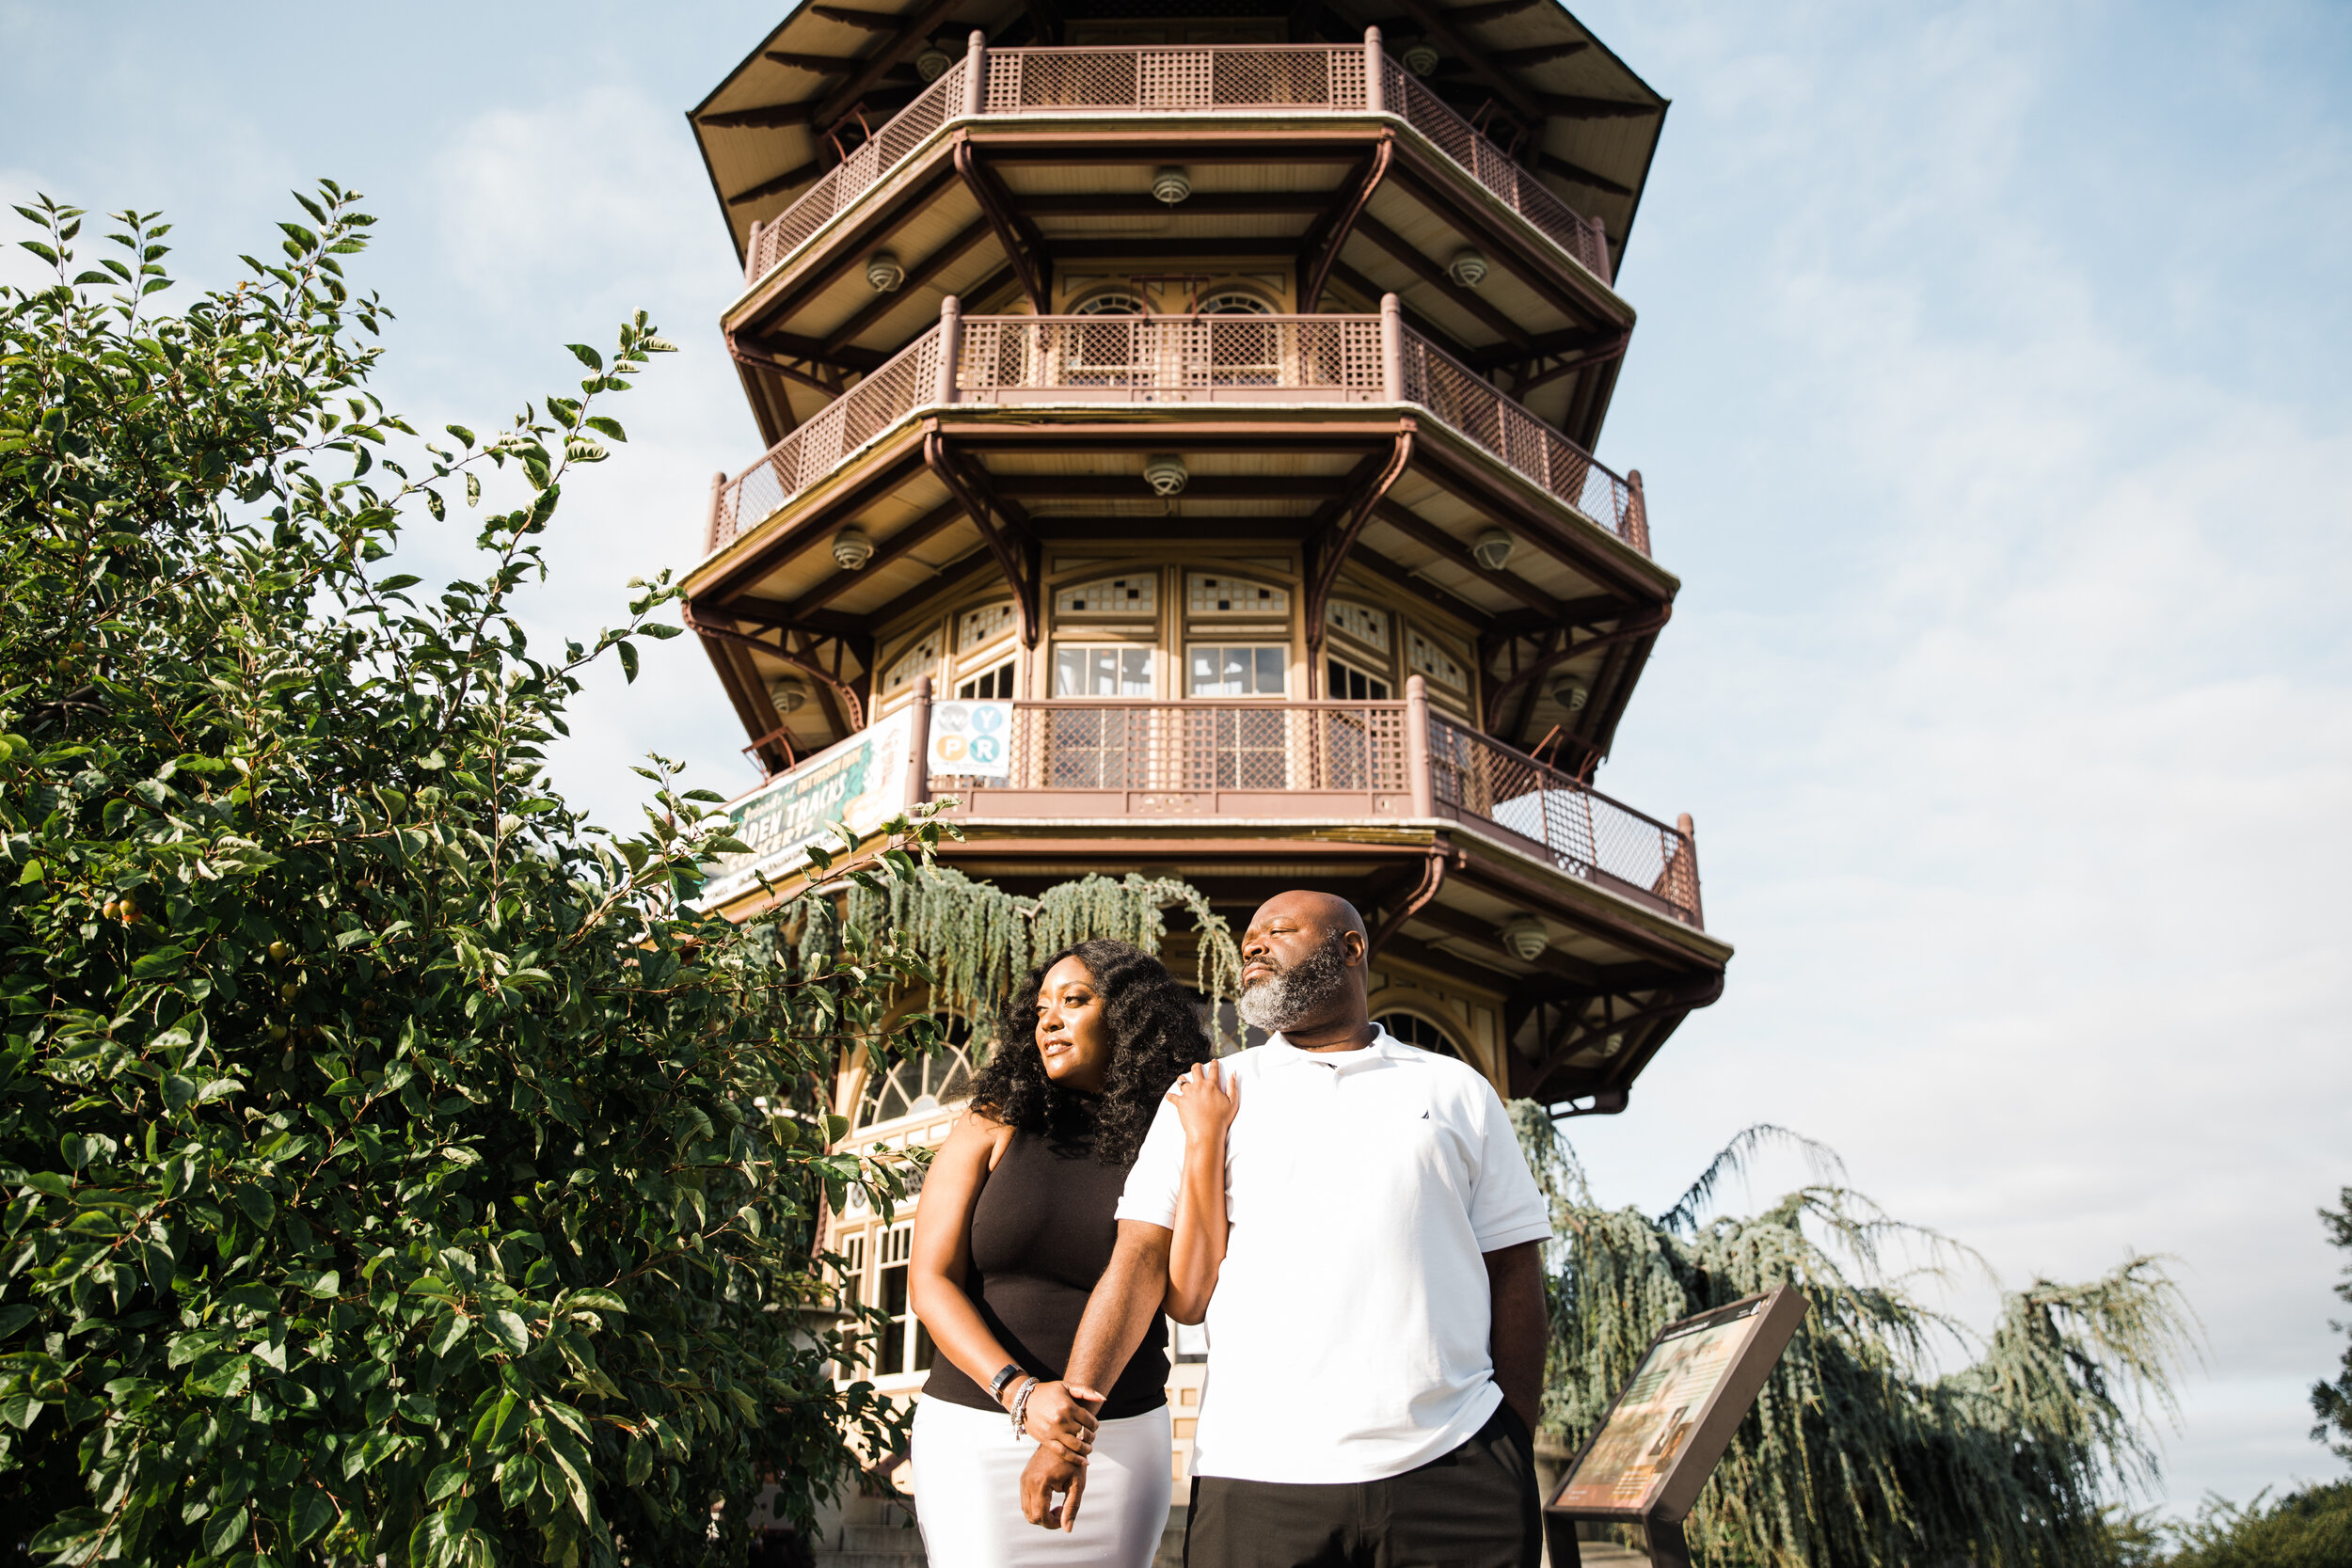 Patterson Park Engagement Session with Black Photographers Megapixels media in Baltimore Maryland (20 of 32).jpg